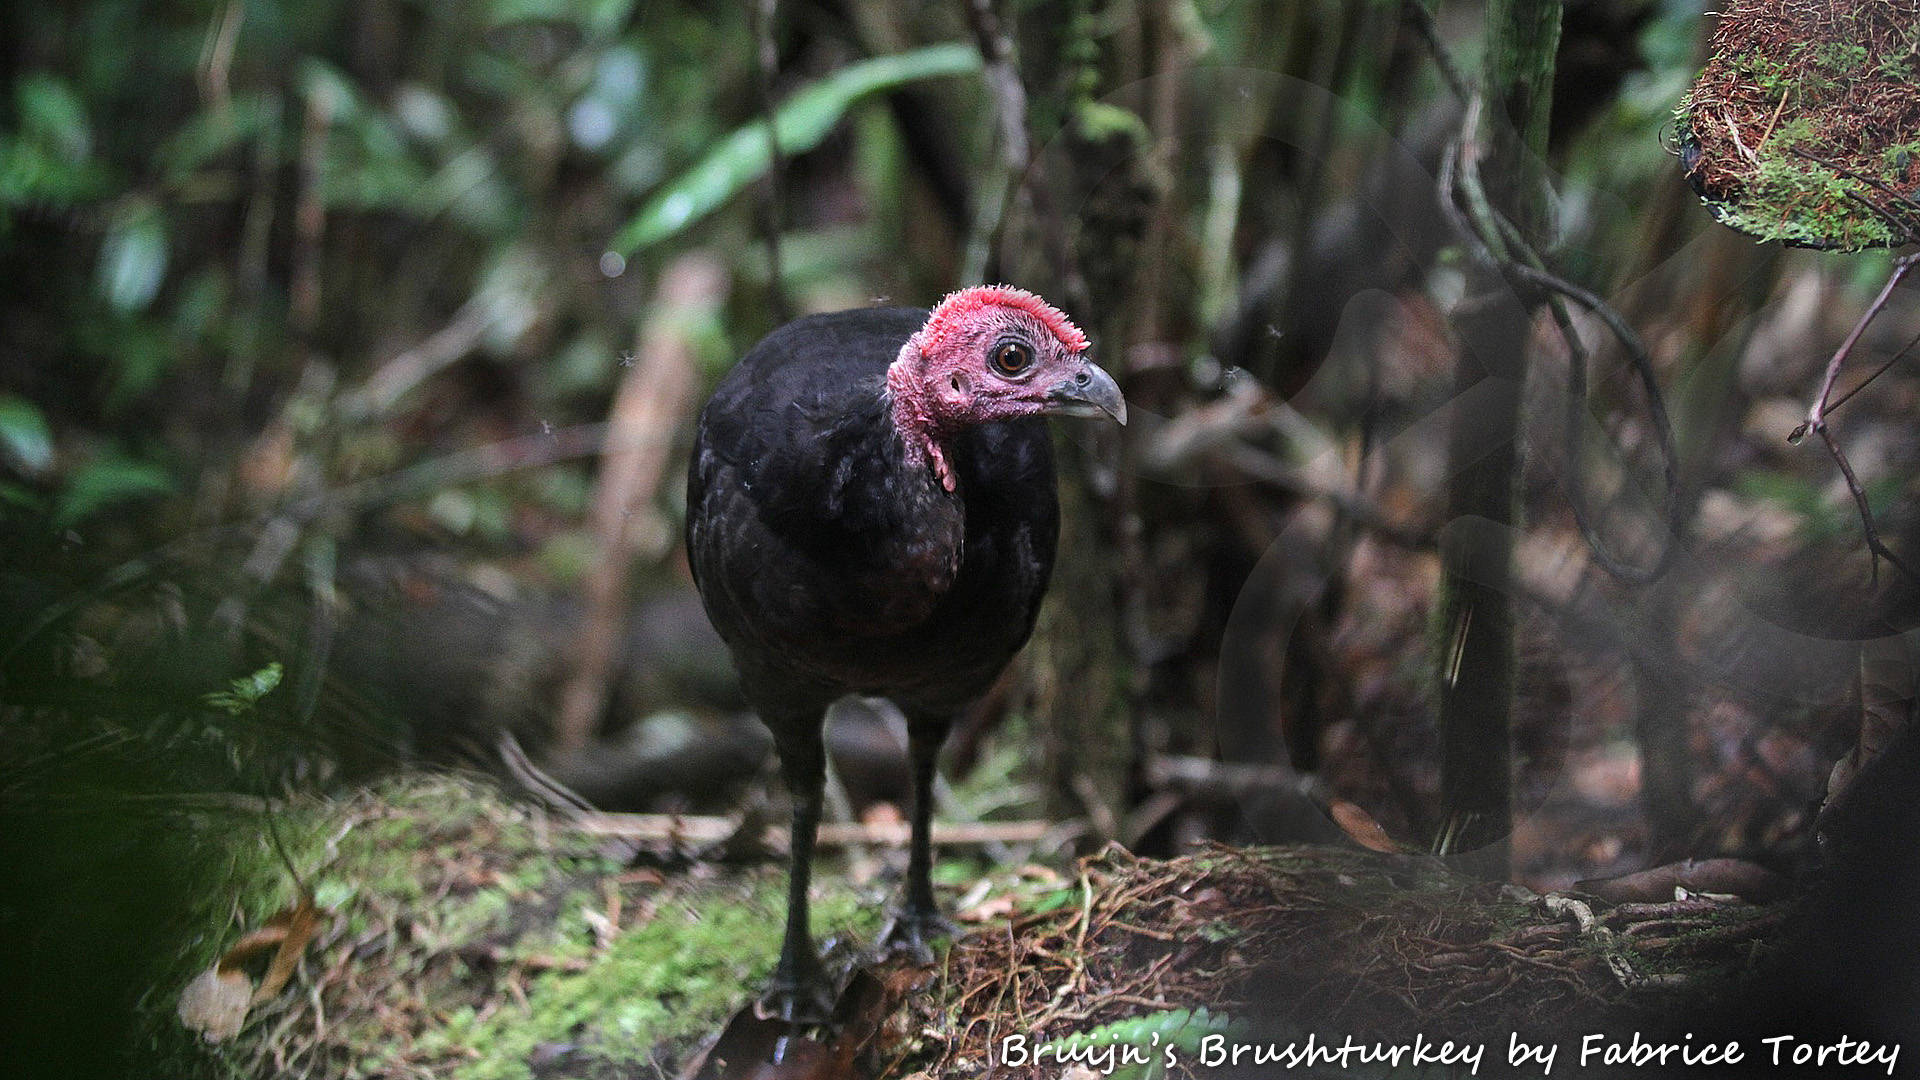 Bruijn's Brushturkey Aepypodius bruijnii is among 65 bird species that occur only in West Papua and nowhere else on Earth. It appears to be entirely confined to the largest Raja Ampat island of Waigeo. Copyright © Fabrice Tortey